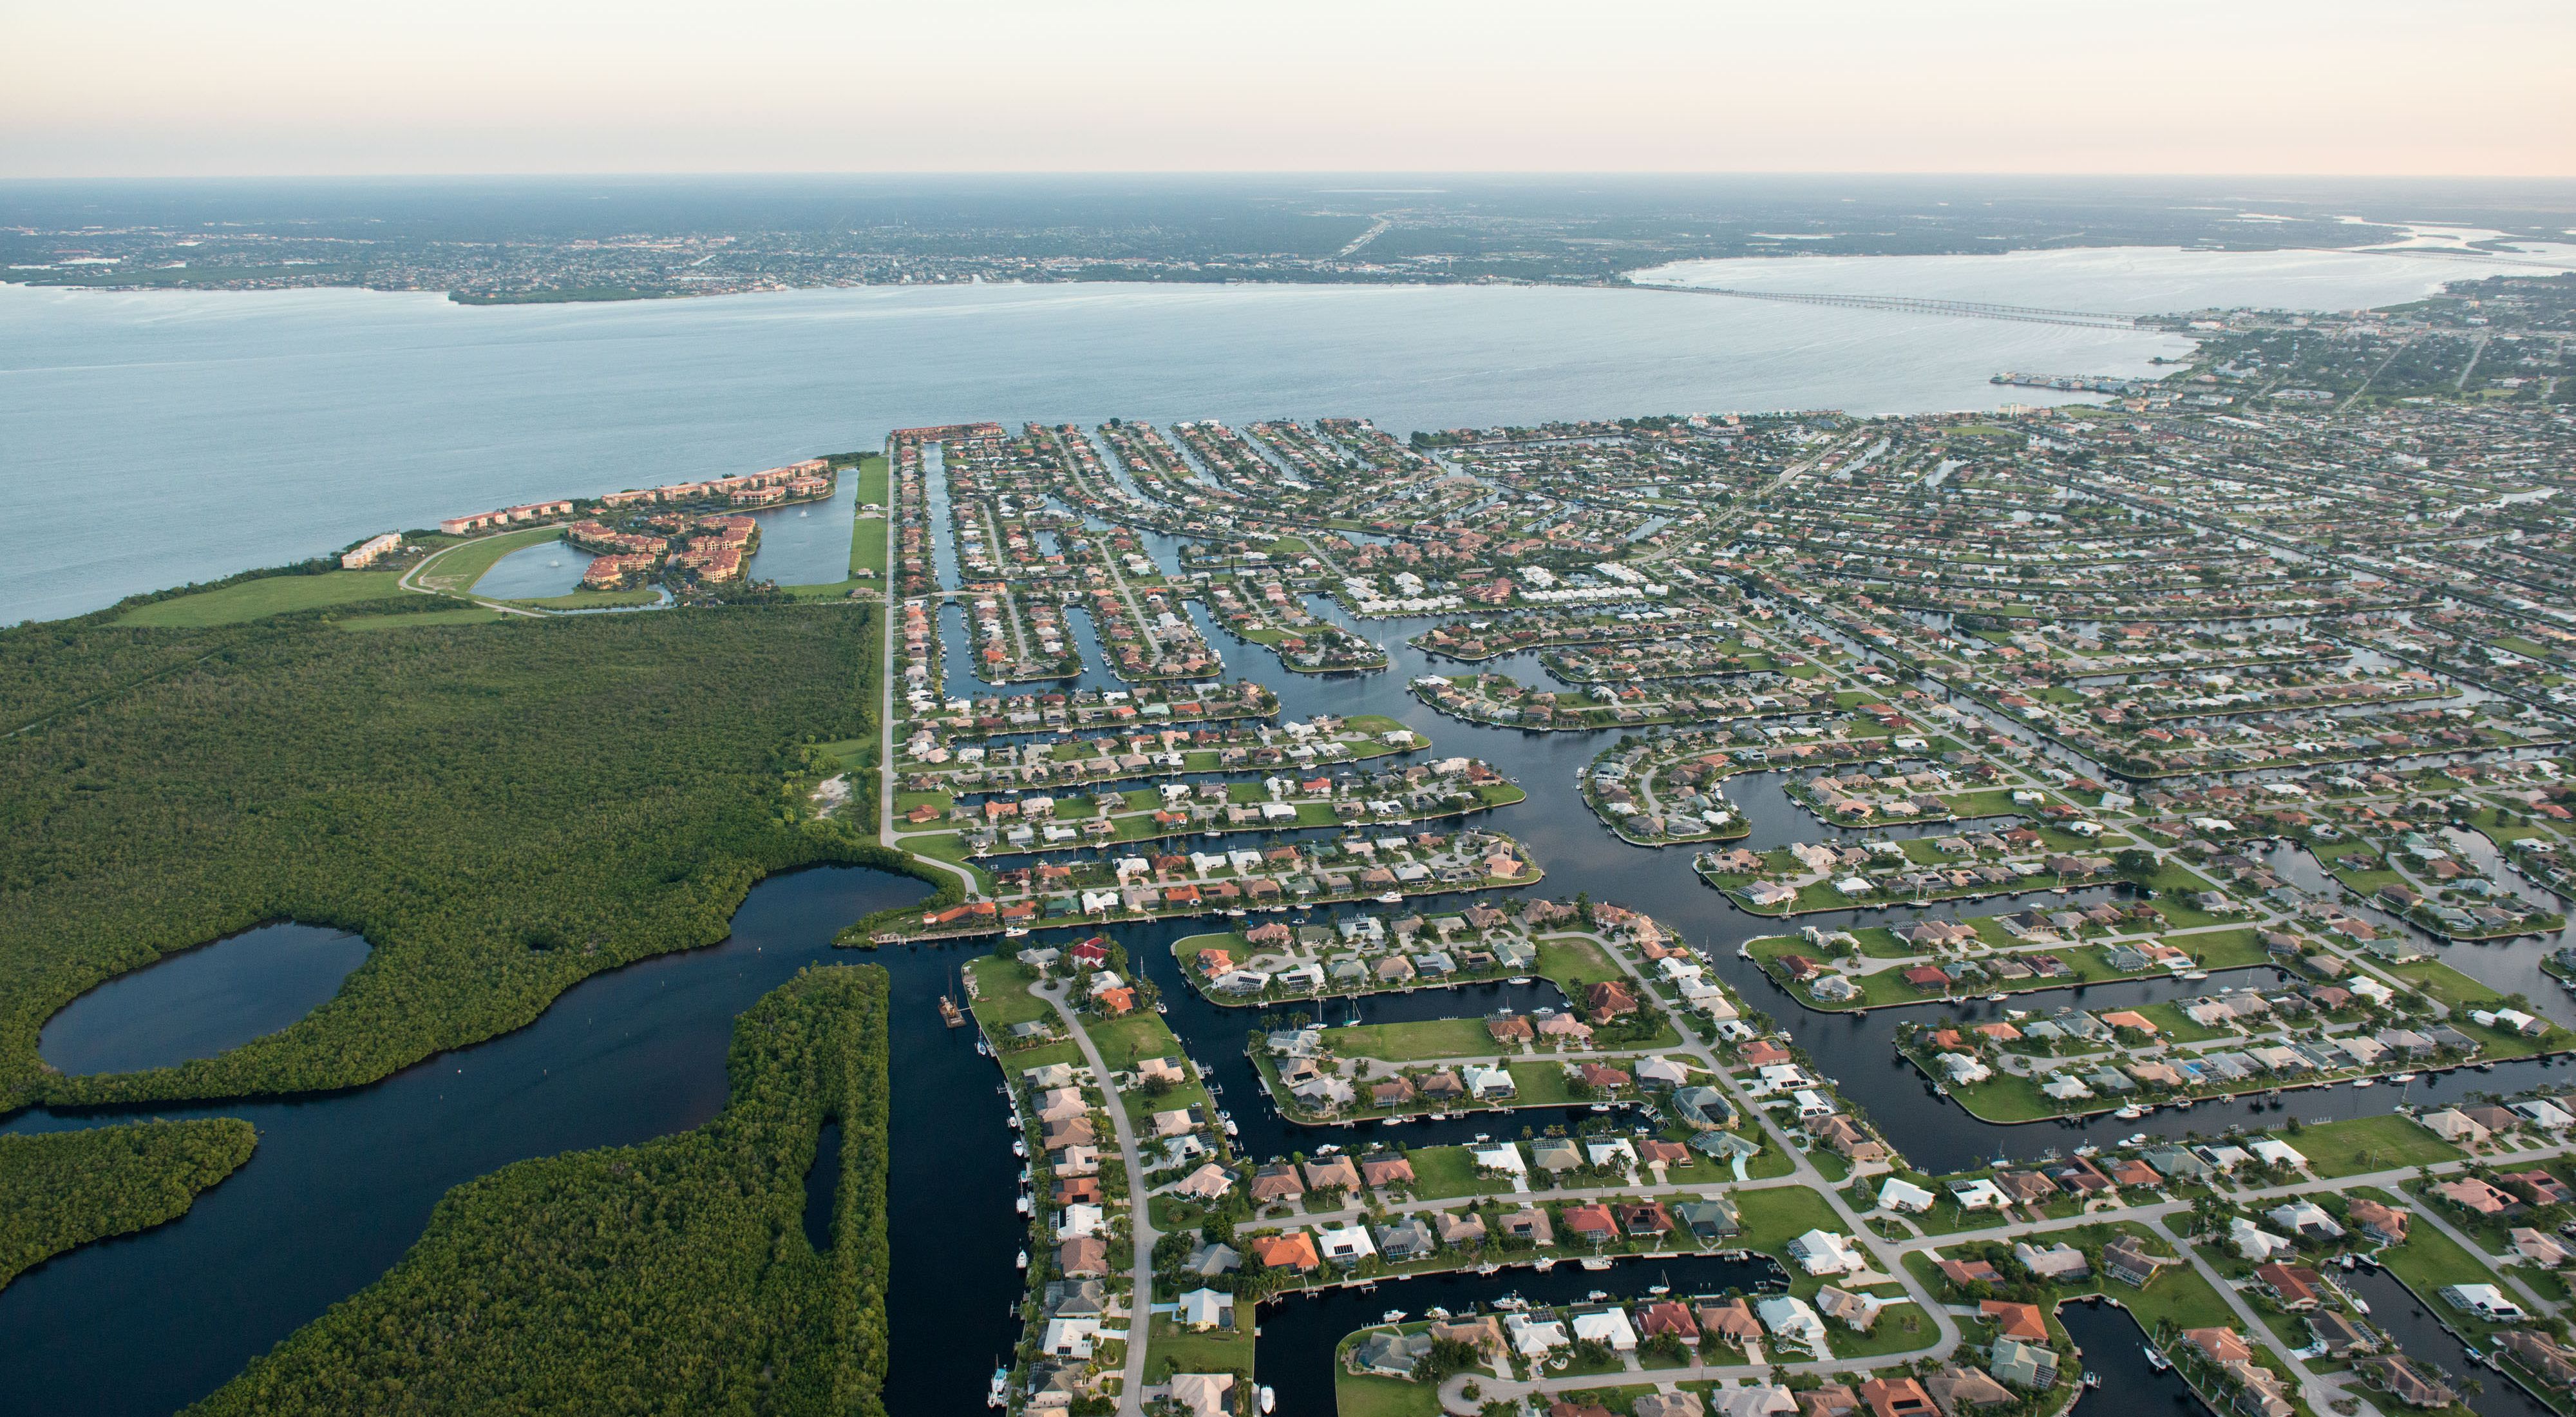 TNC is working closely with the city and regional partners, developing projects to improve coastal resilience.